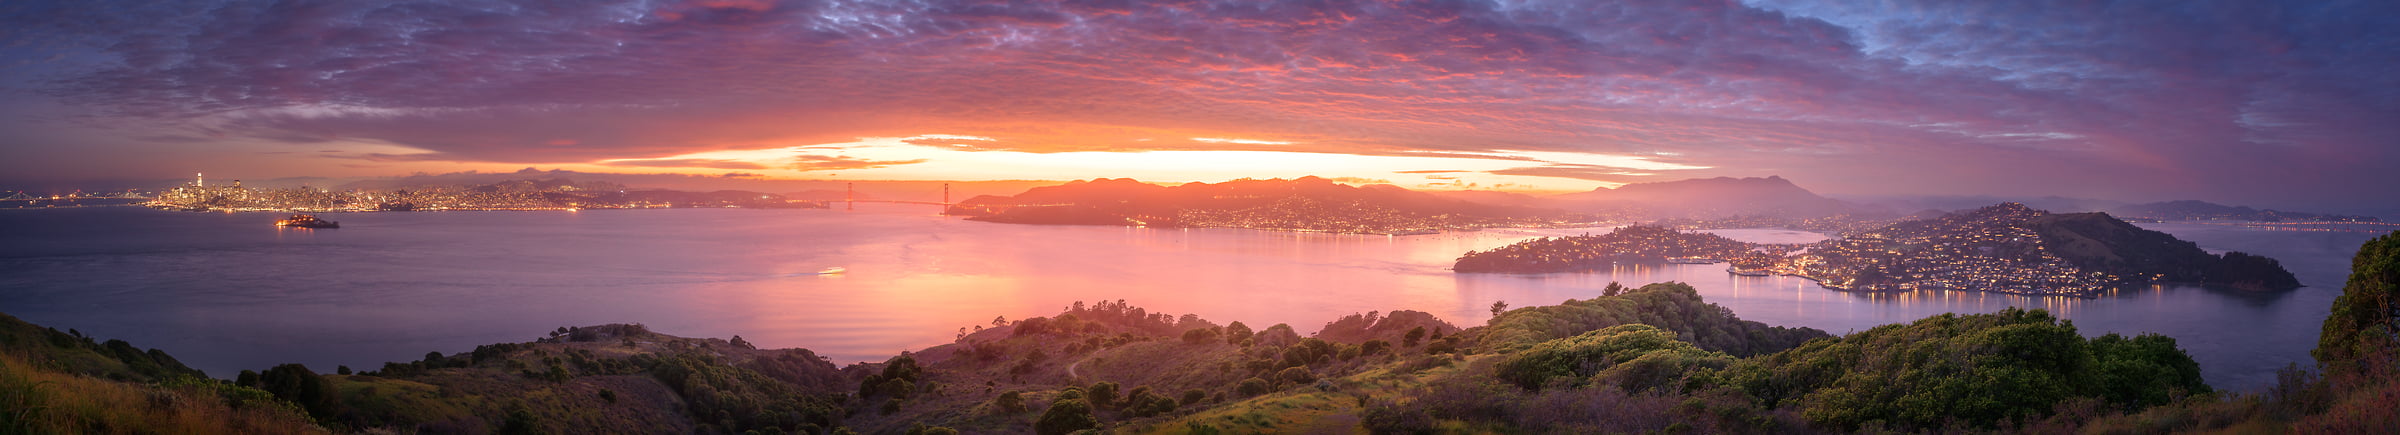 248 megapixels! A very high resolution, large-format, panorama photo print of the San Francisco Bay, San Francisco skyline, Golden Gate Bridge, and Marin Headlands at sunset; landscape photograph created by Jeff Lewis in Marin County, California.